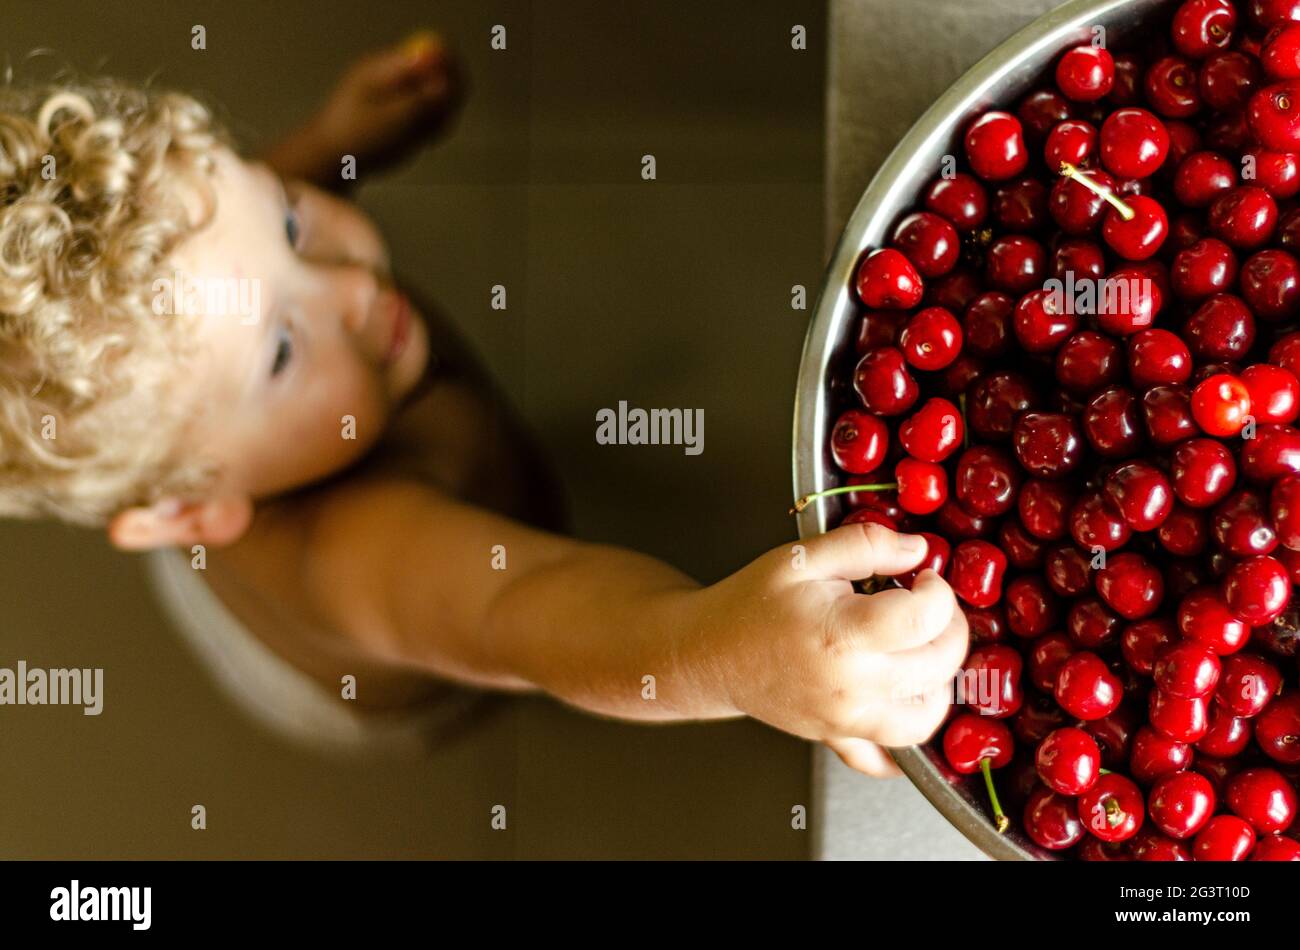 boy 2 years old reaching for a cherry, top view Stock Photo